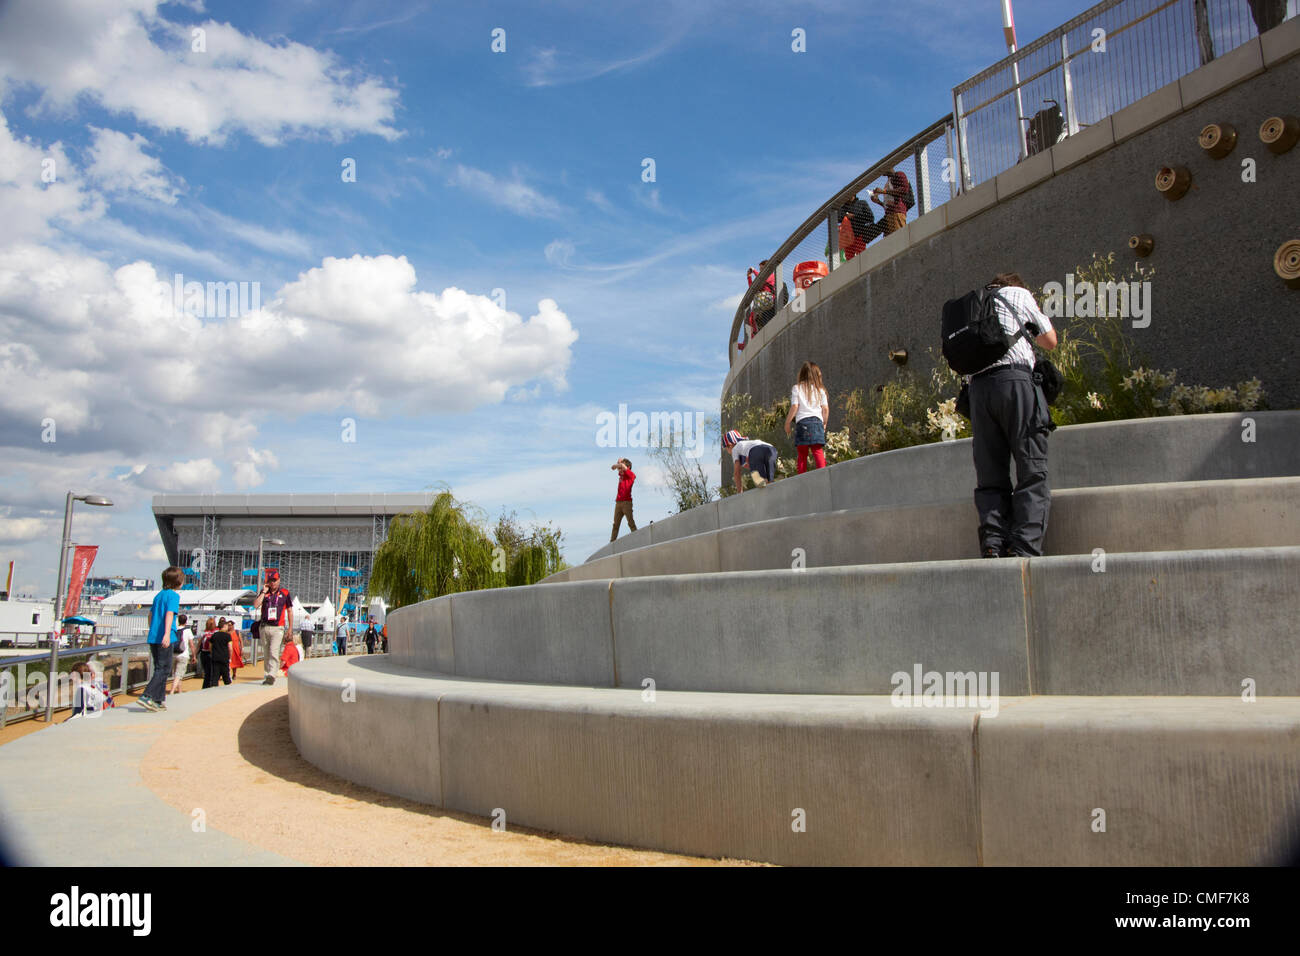 Steps feature at Olympic Park, London 2012 Olympic Games site, Stratford London E20 UK, Stock Photo